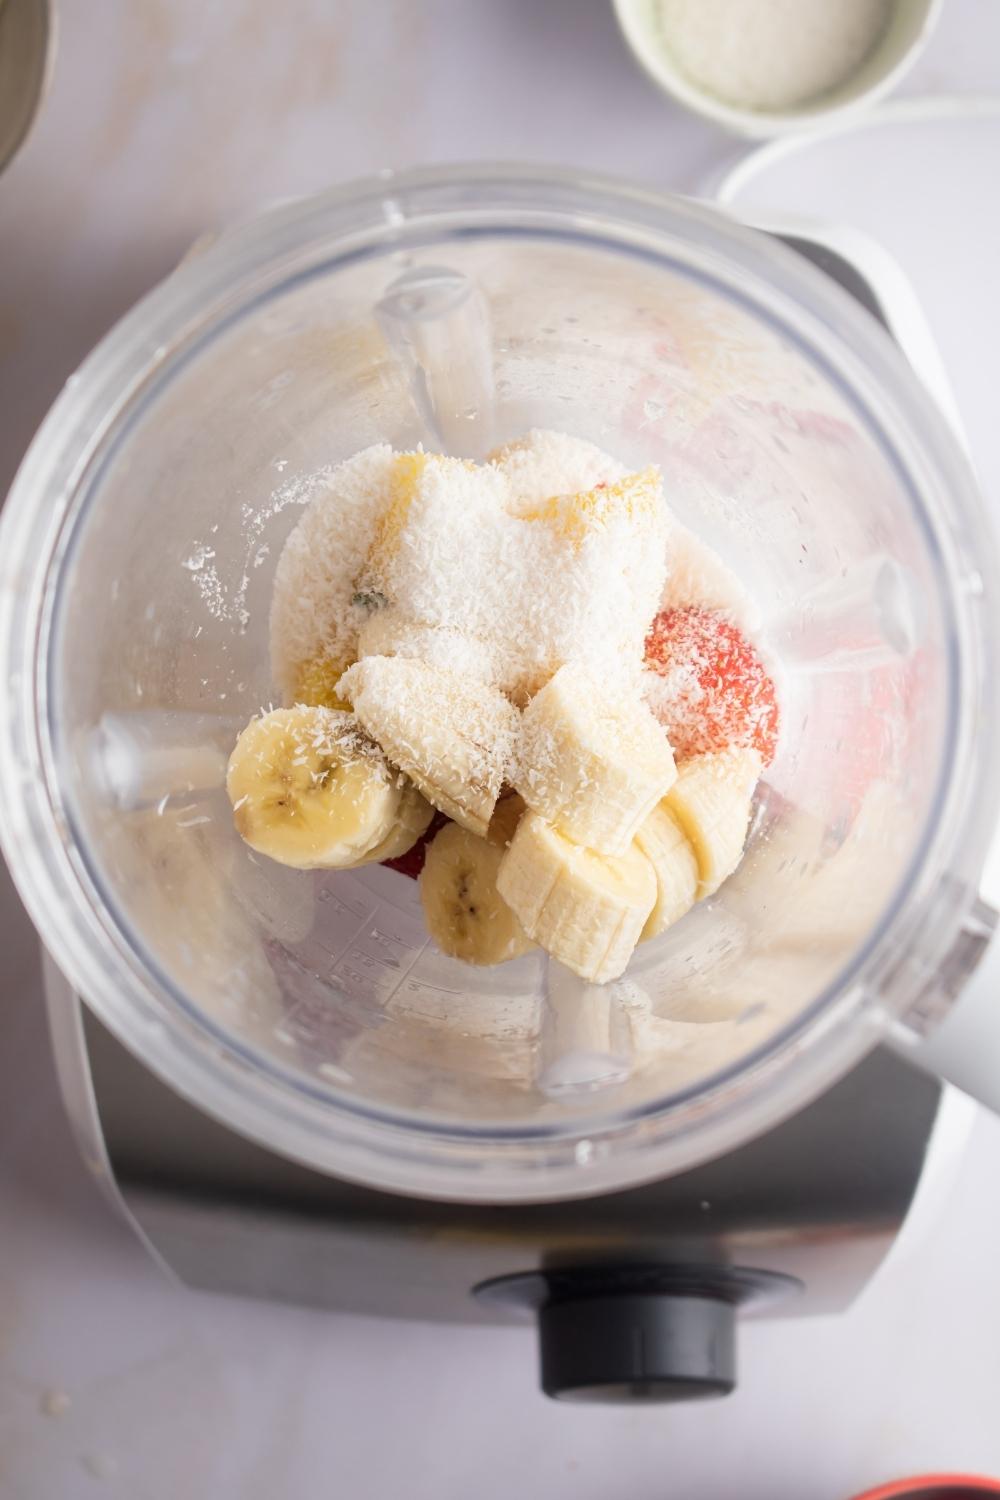 A blender with banana, strawberry, white chocolate, and pineapple in it.